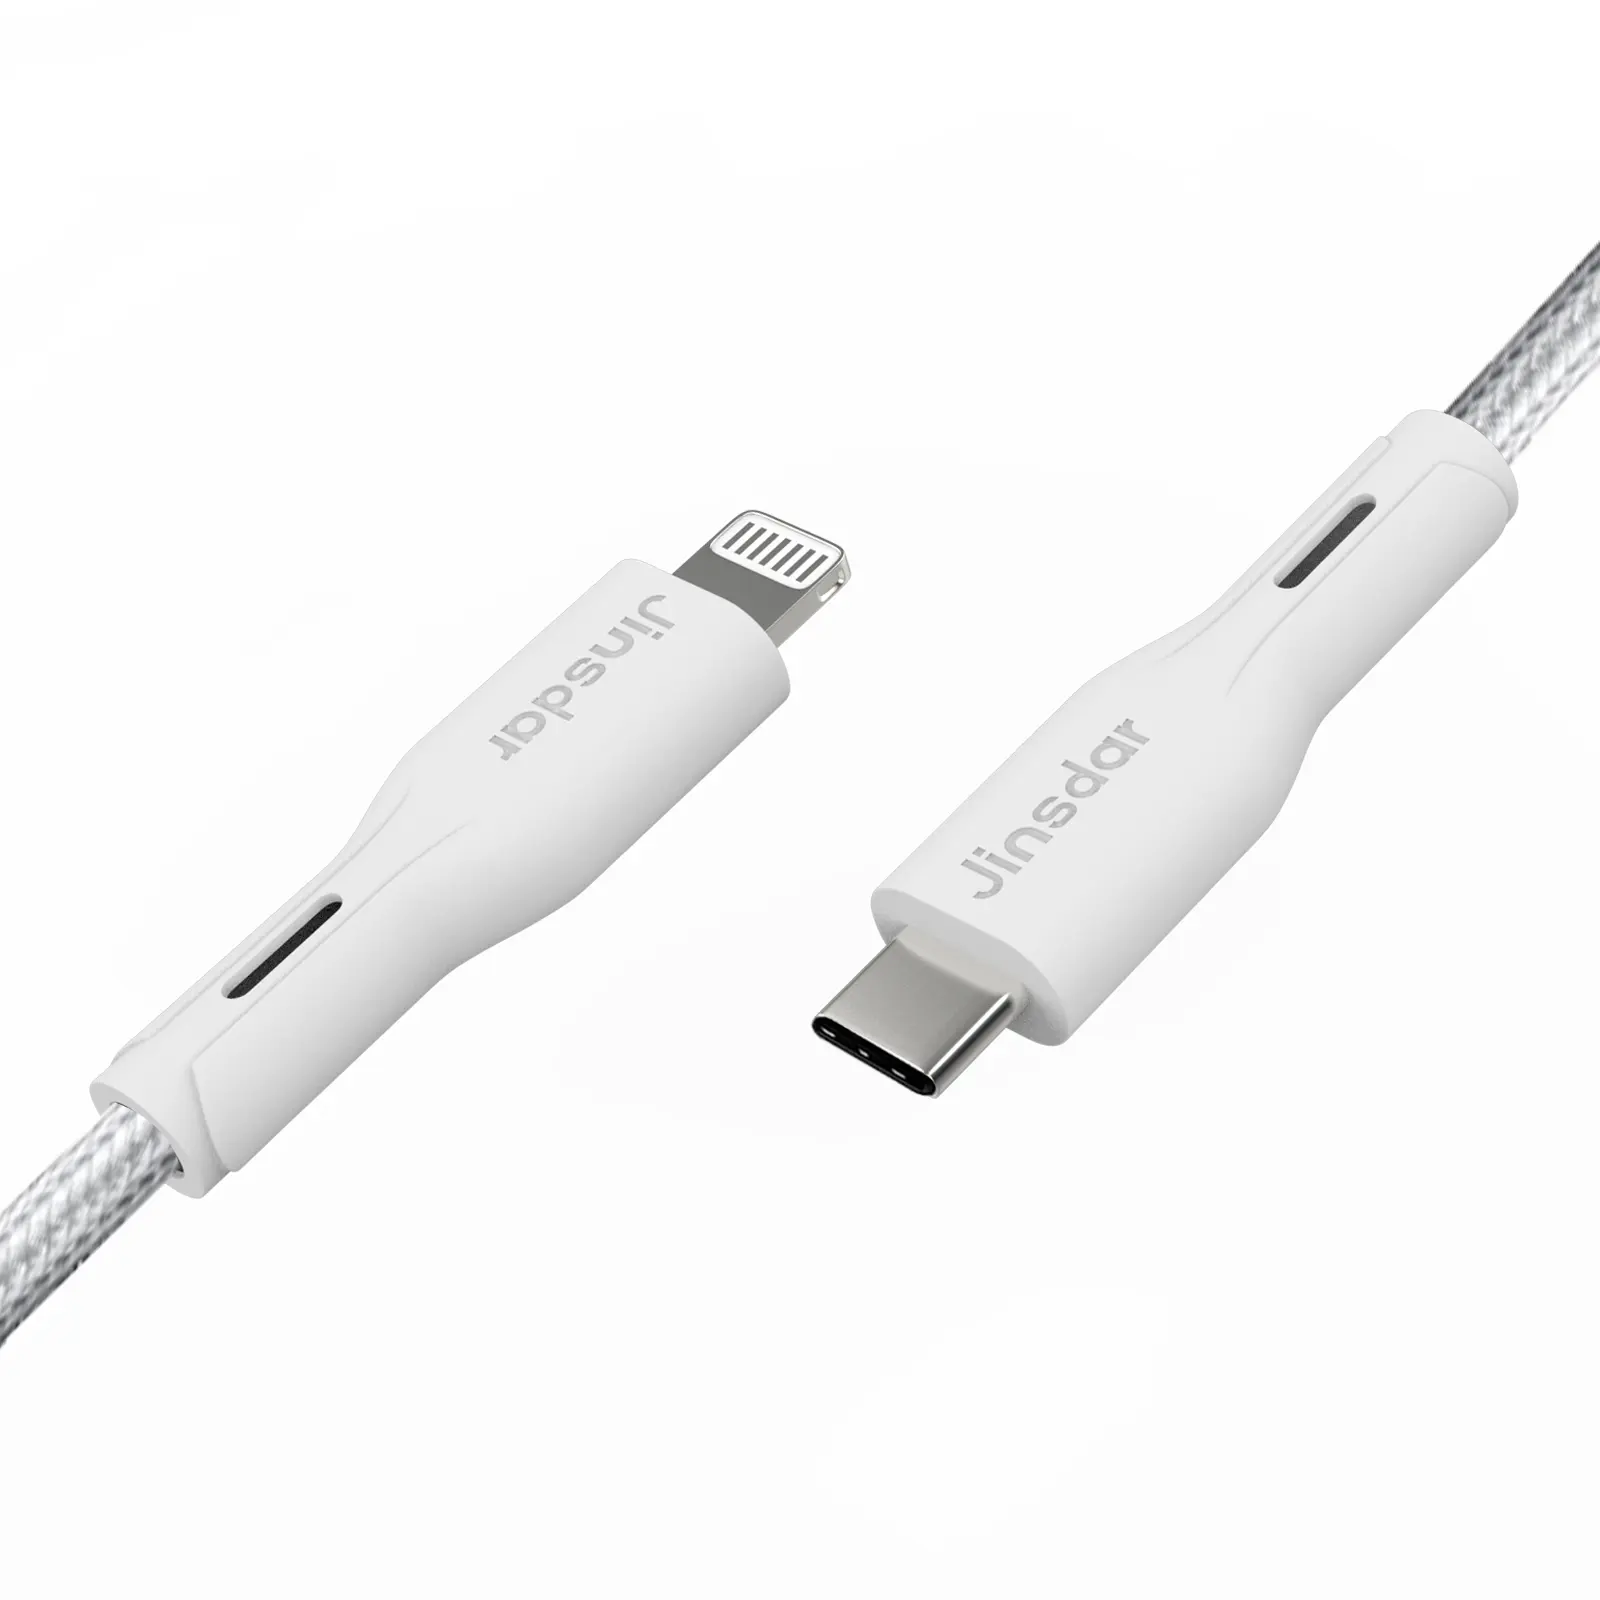 Jinsdar MFi cable 60W 6FT 480mbps USB C to Lightning charging cable MFi certified for iphone, ipad, ipod